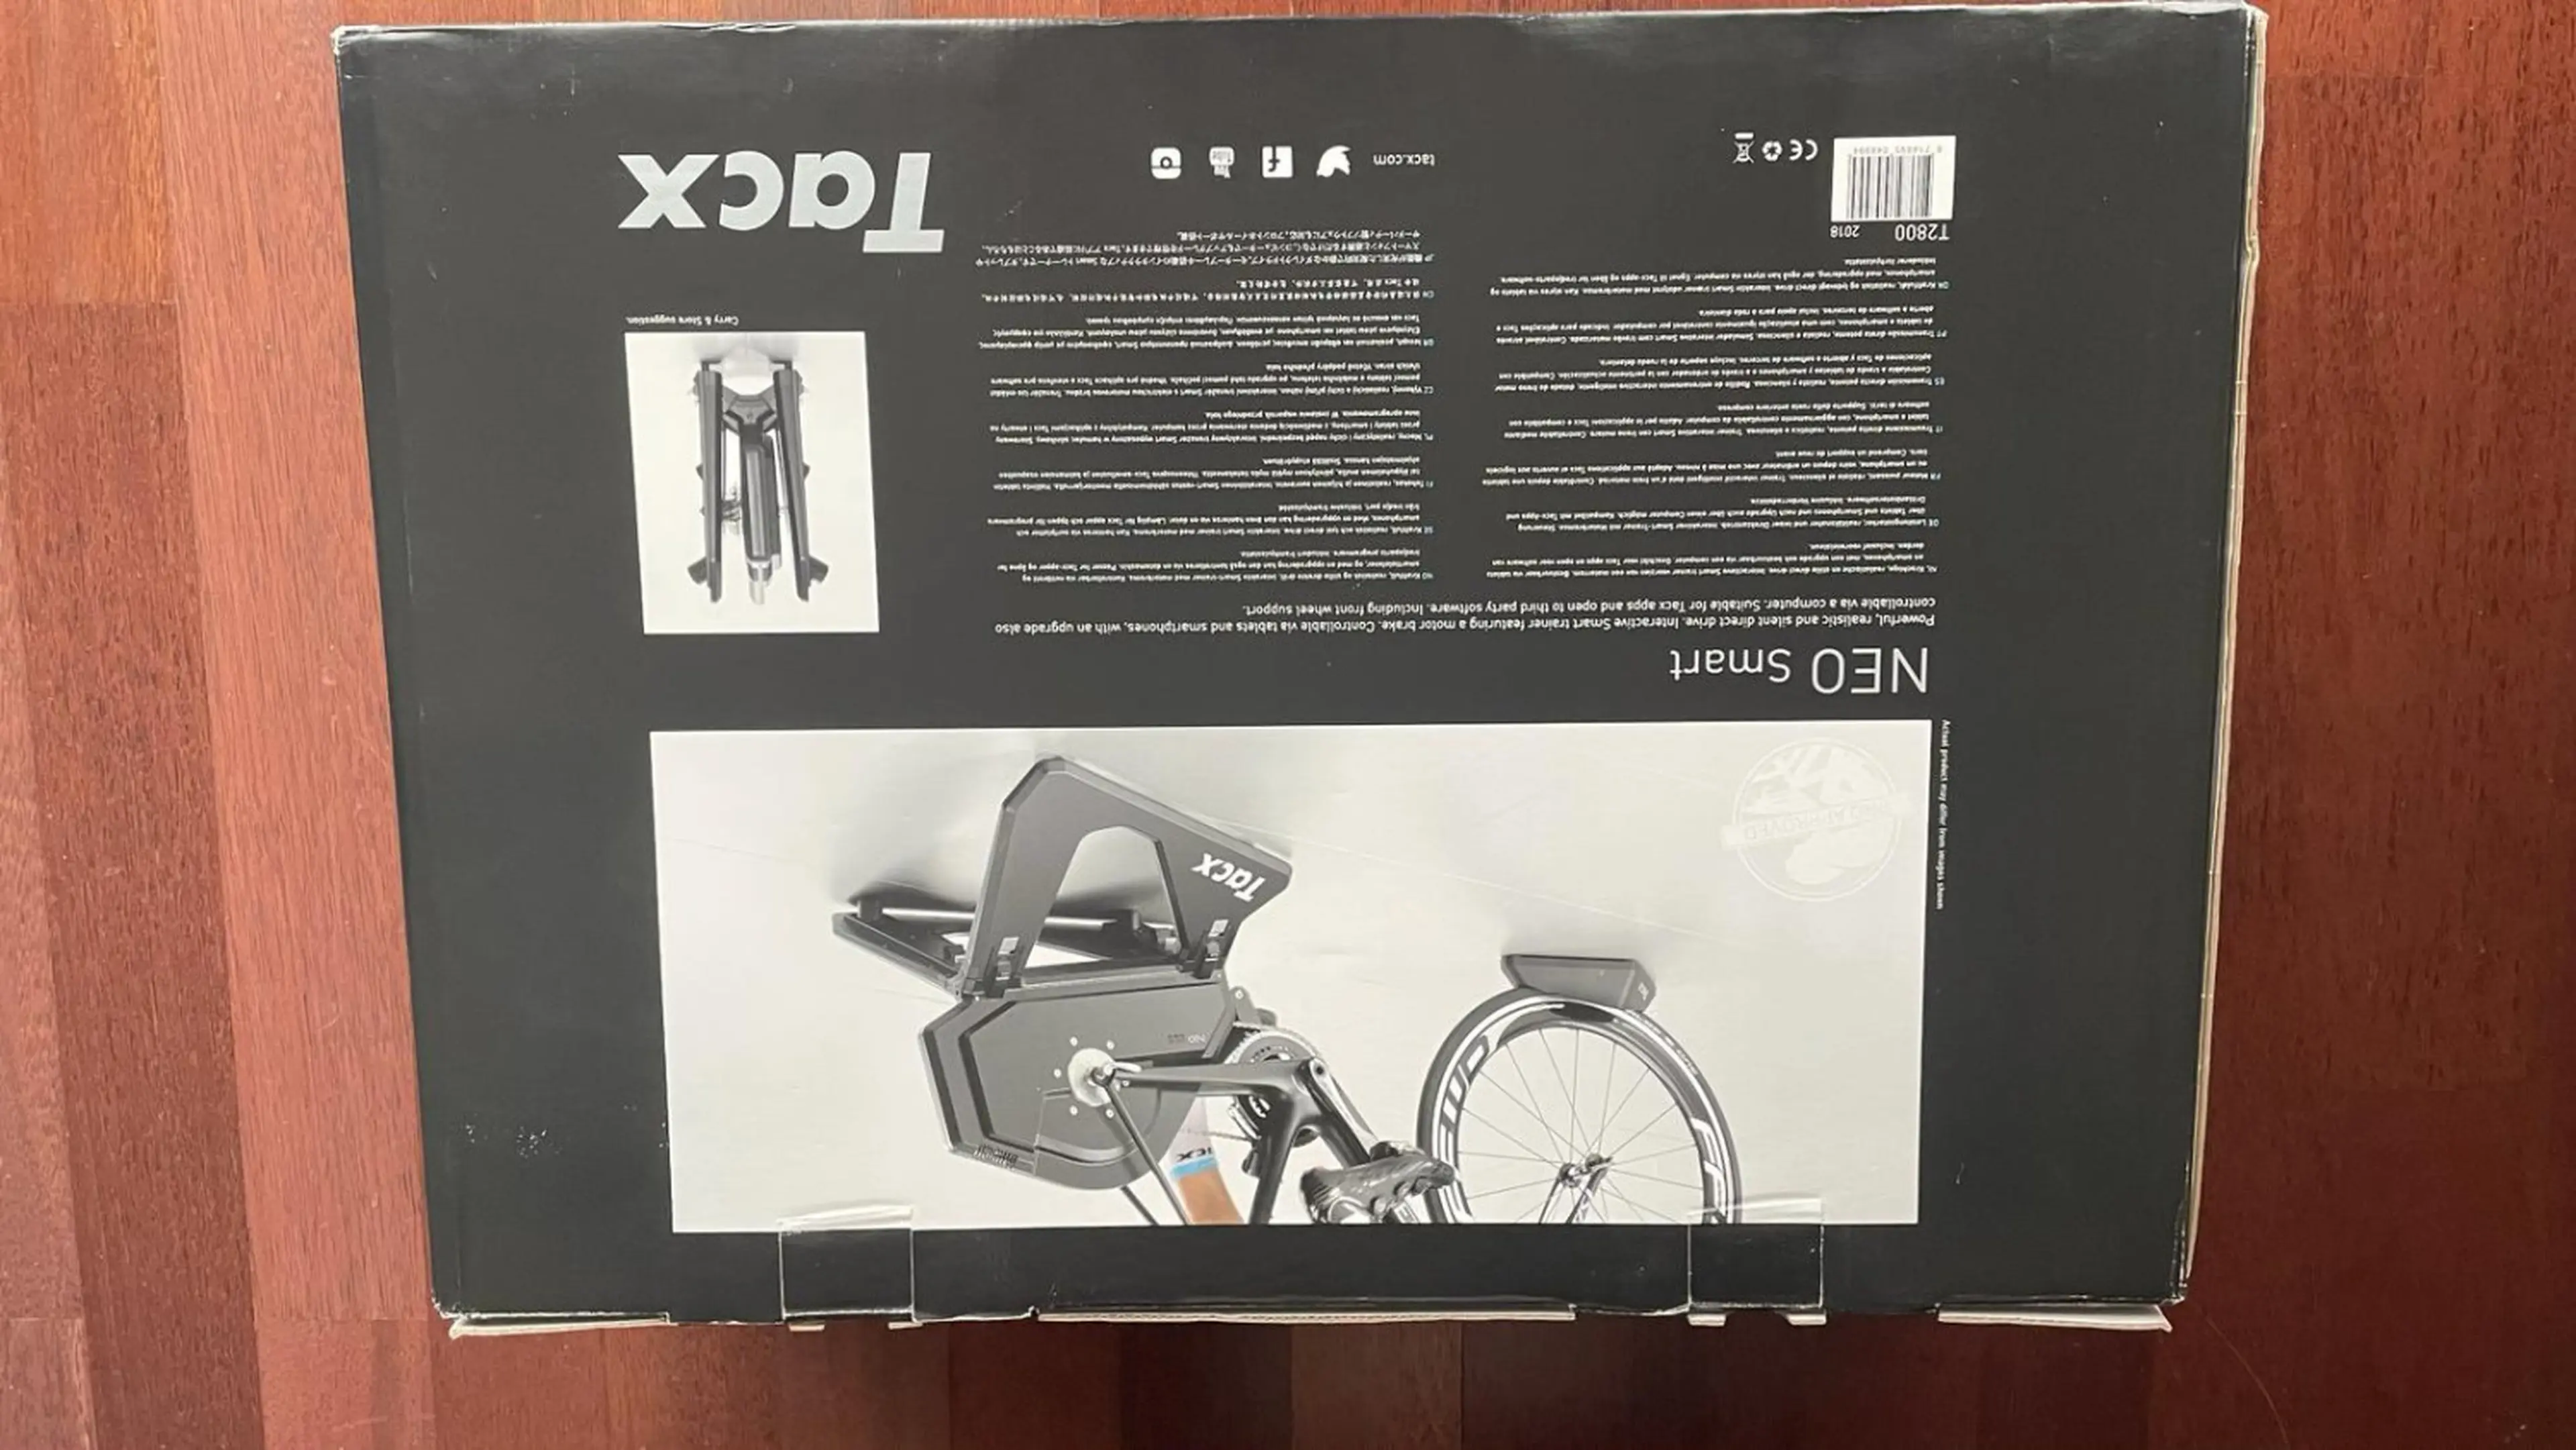 3. Trainer smart Tacx Neo T2800